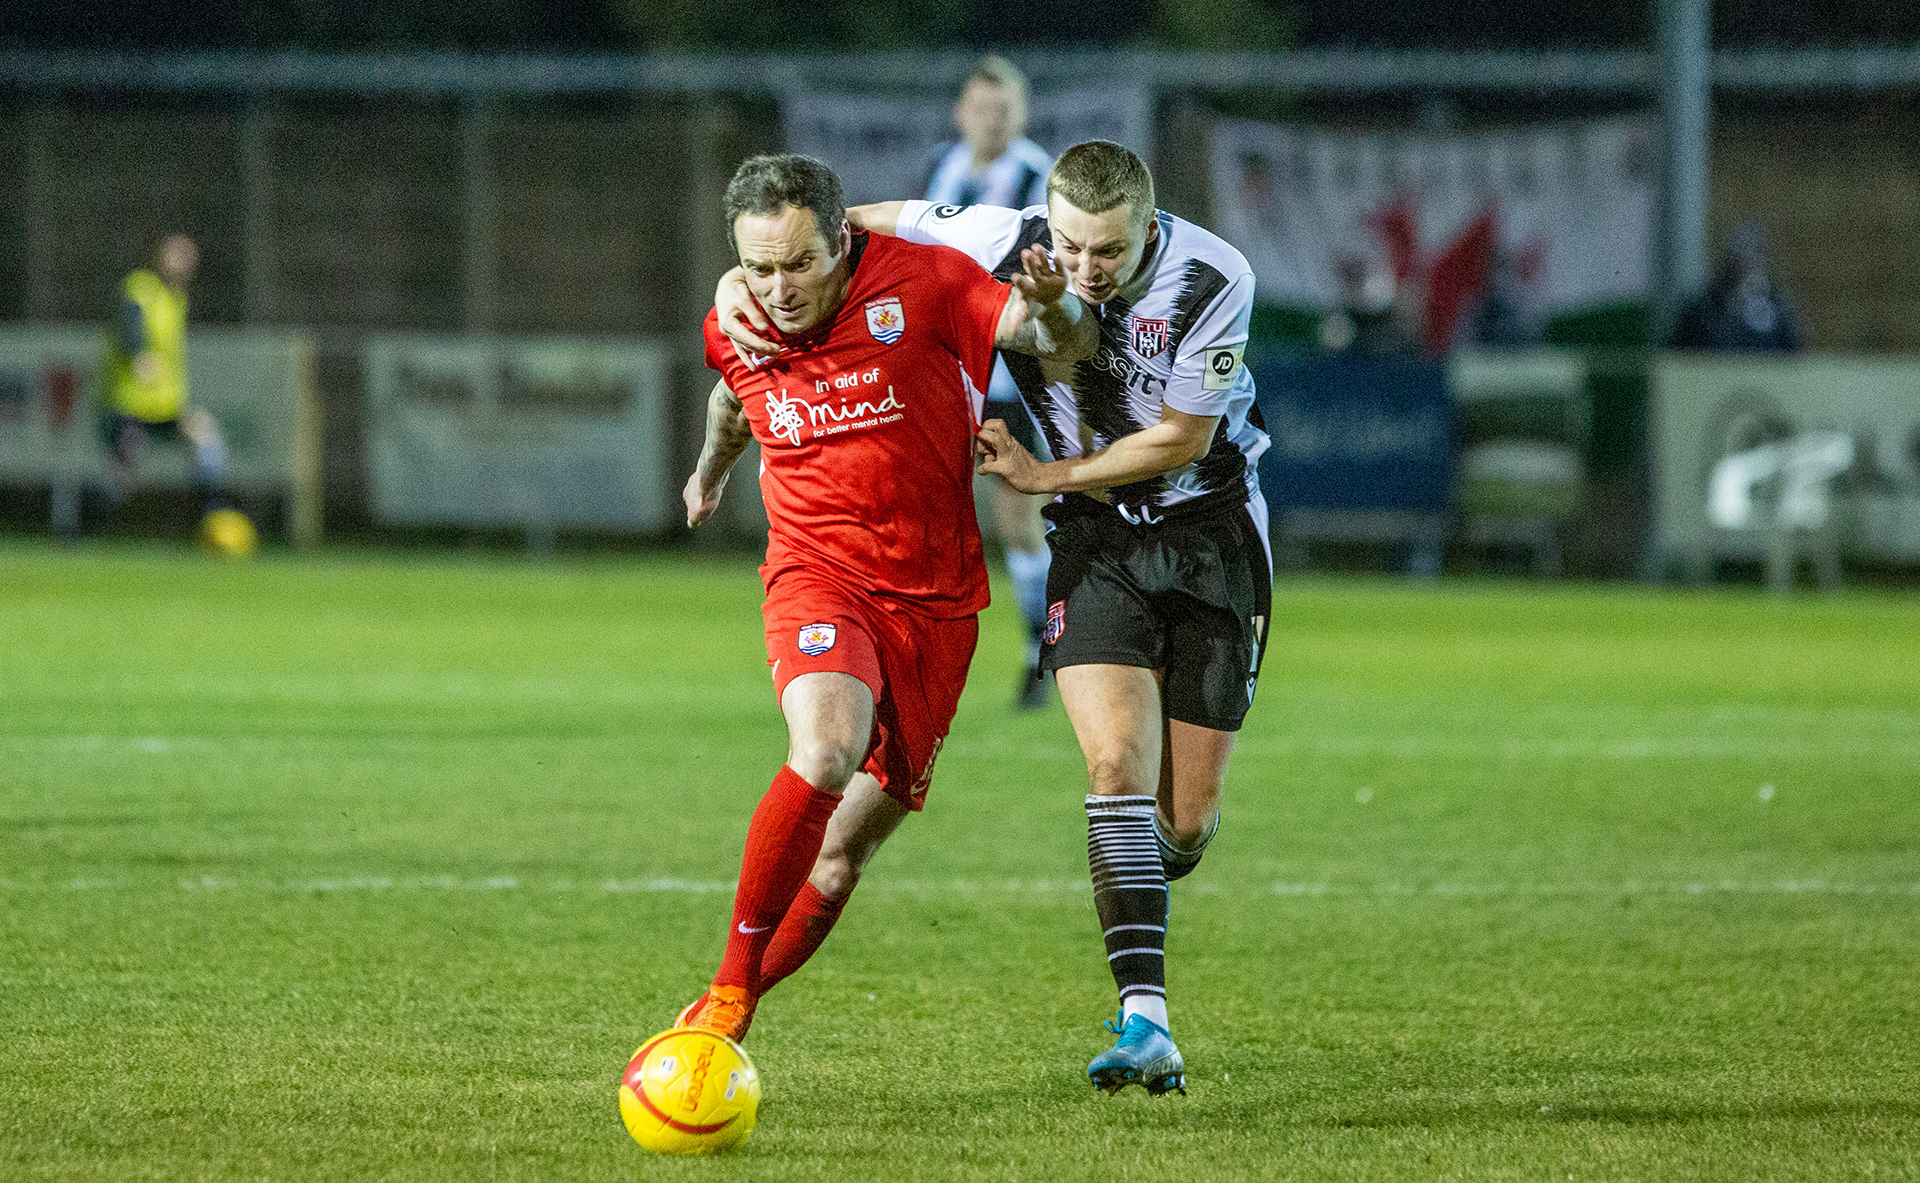 Danny Holmes clashes with ex Nomads Rob Hughes | © NCM Media